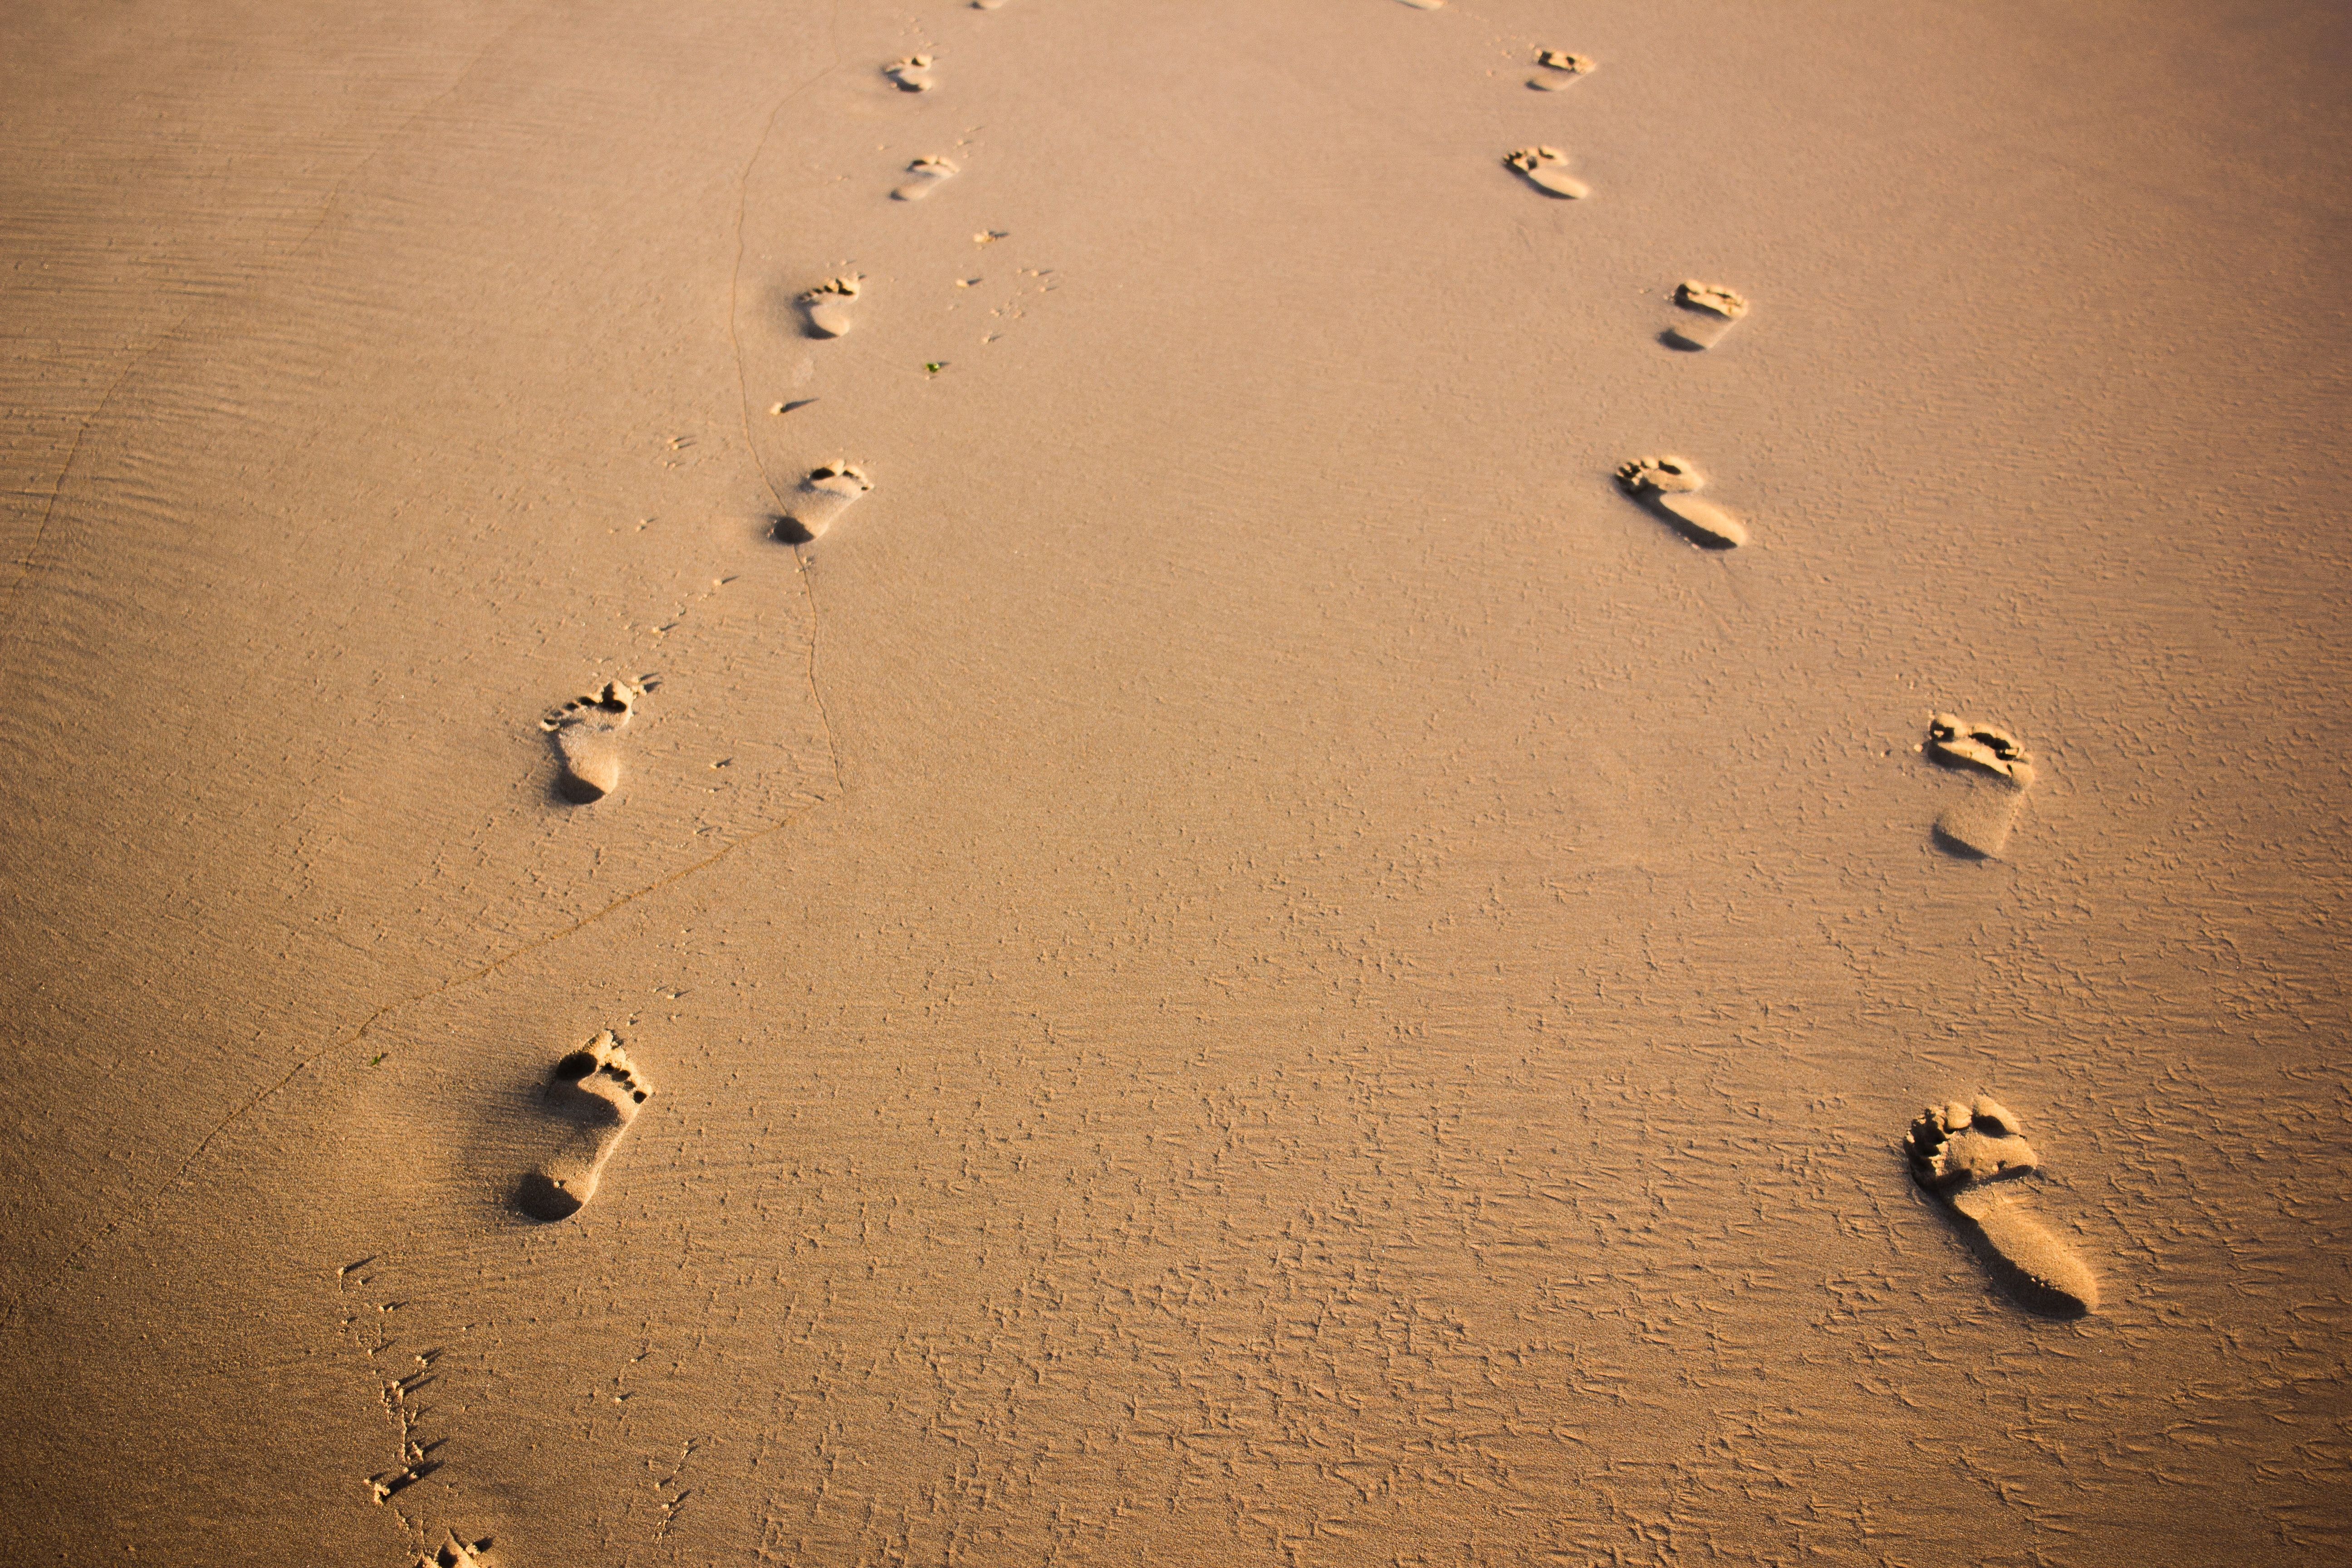 Two Pairs of Footprints Side by Side on the Beach